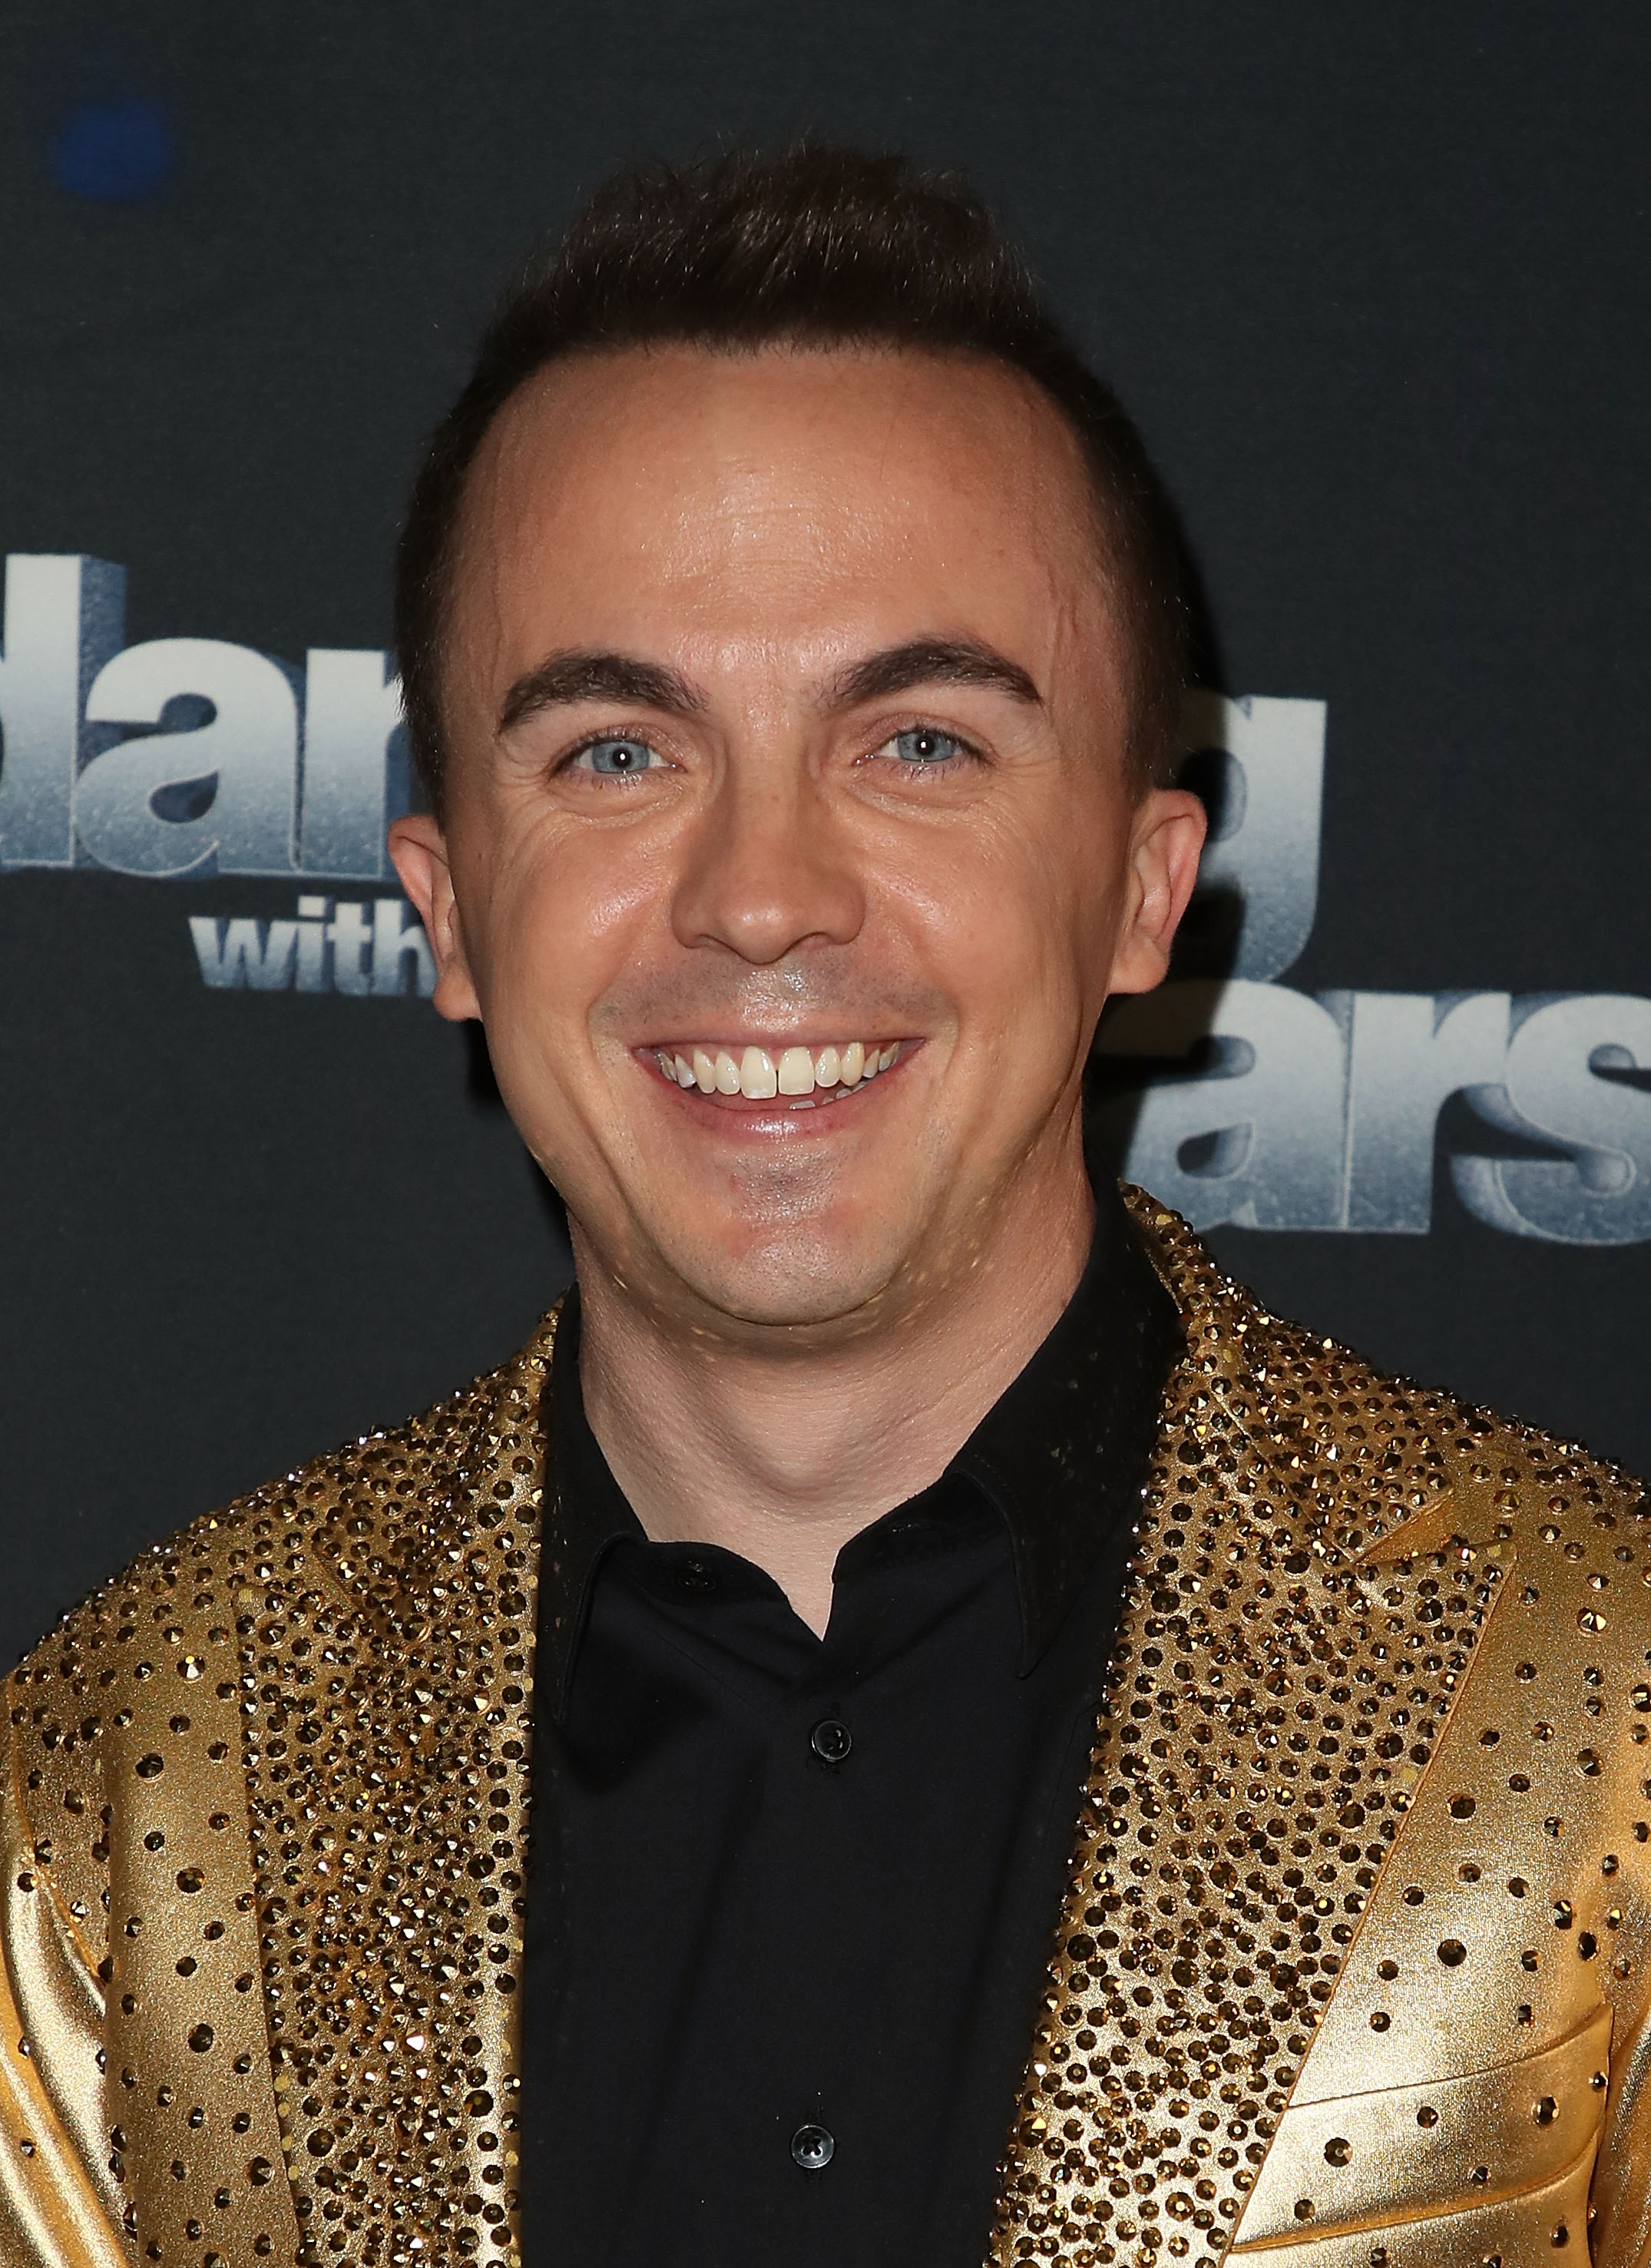 Frankie Muniz during season 27 of ABC's "Dancing With the Stars" on October 1, 2018 in Los Angeles, California | Source: Getty Images